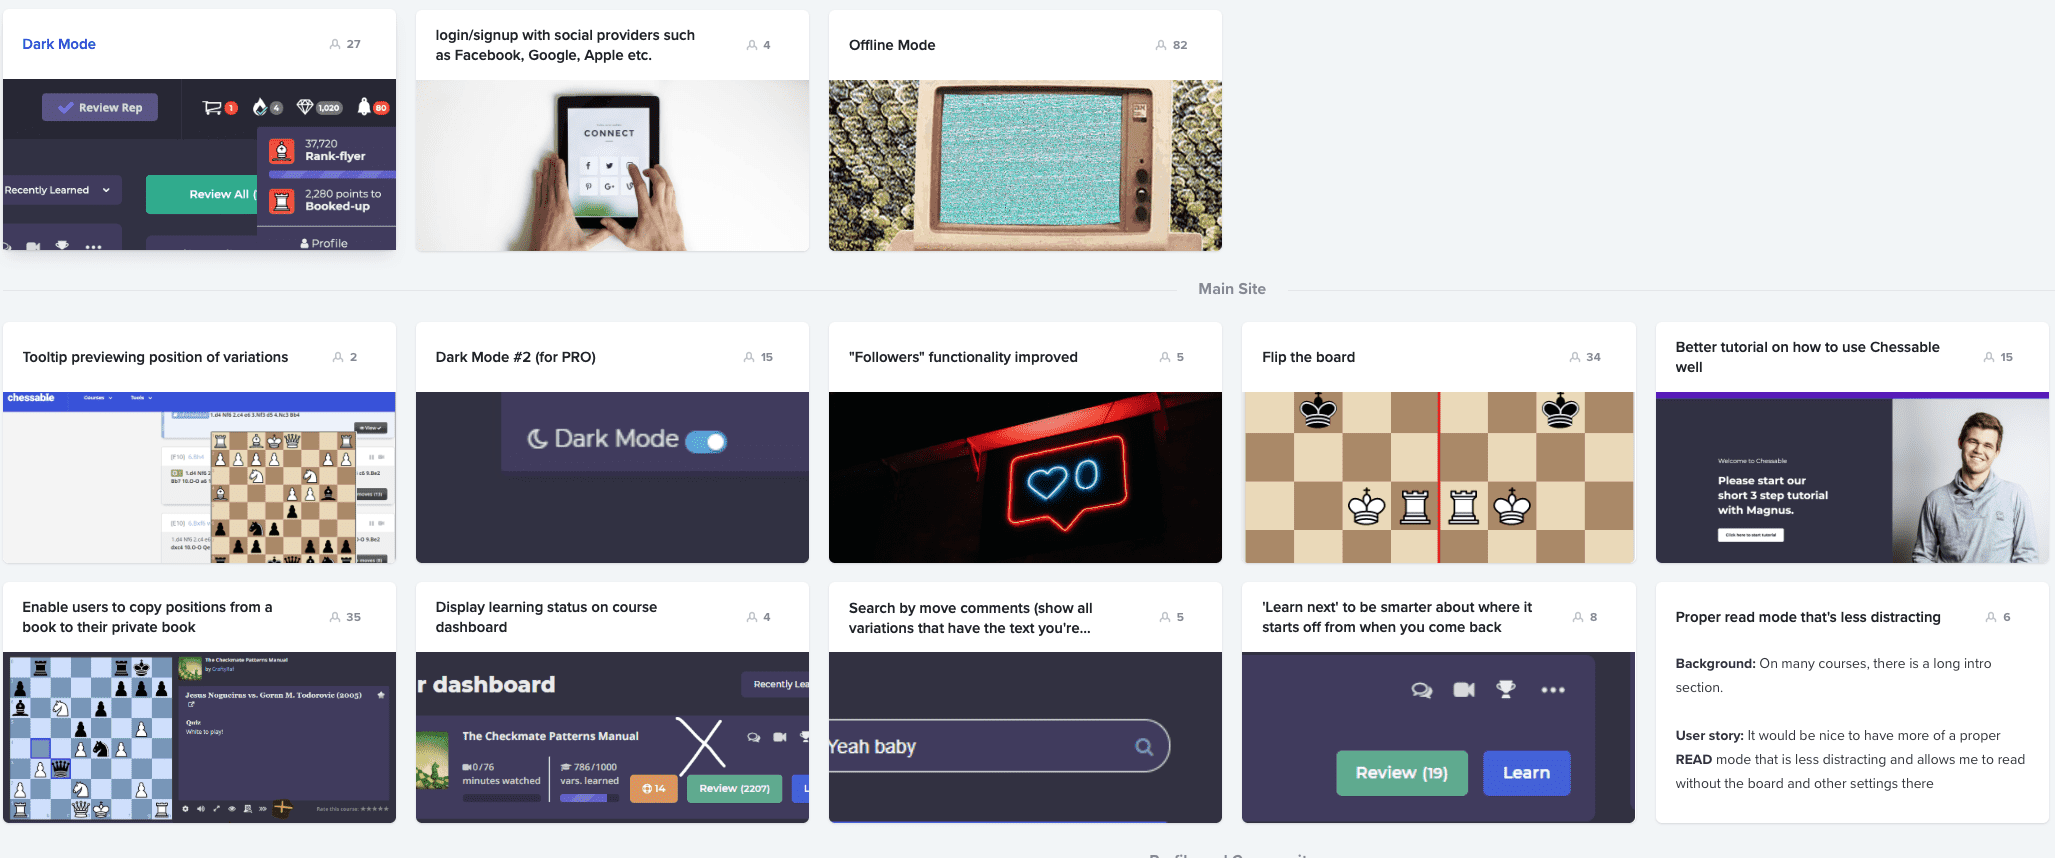 Chessable Product Portal